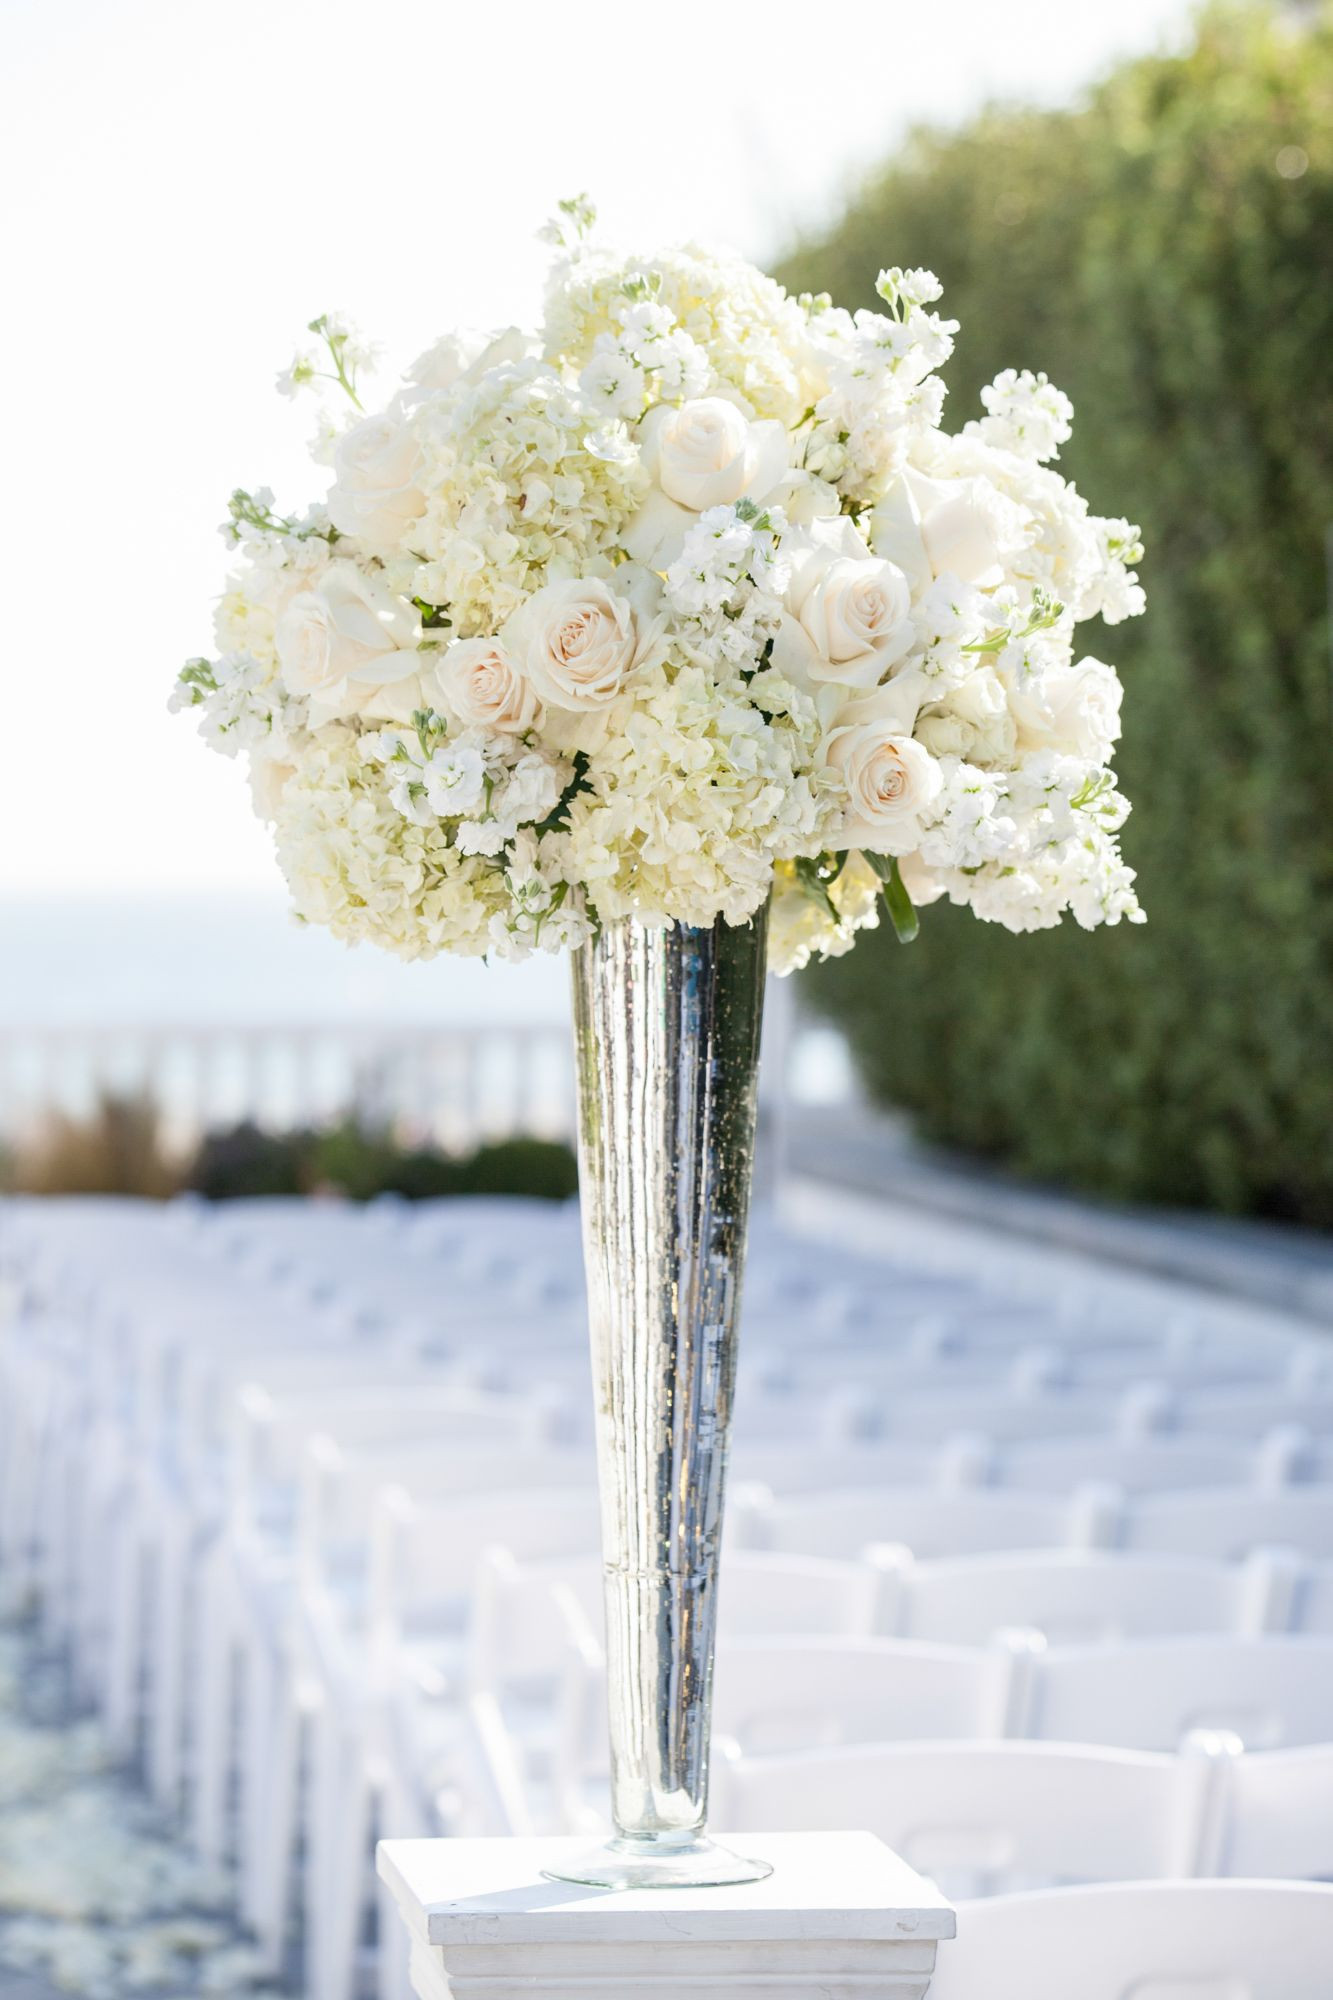 12 Popular where to Buy Silver Vase orchids 2024 free download where to buy silver vase orchids of white and silver vase pics xh vases silver vase chinese export 1i 0d inside white and silver vase images tall white rose and hydrangea centerpiece in a si